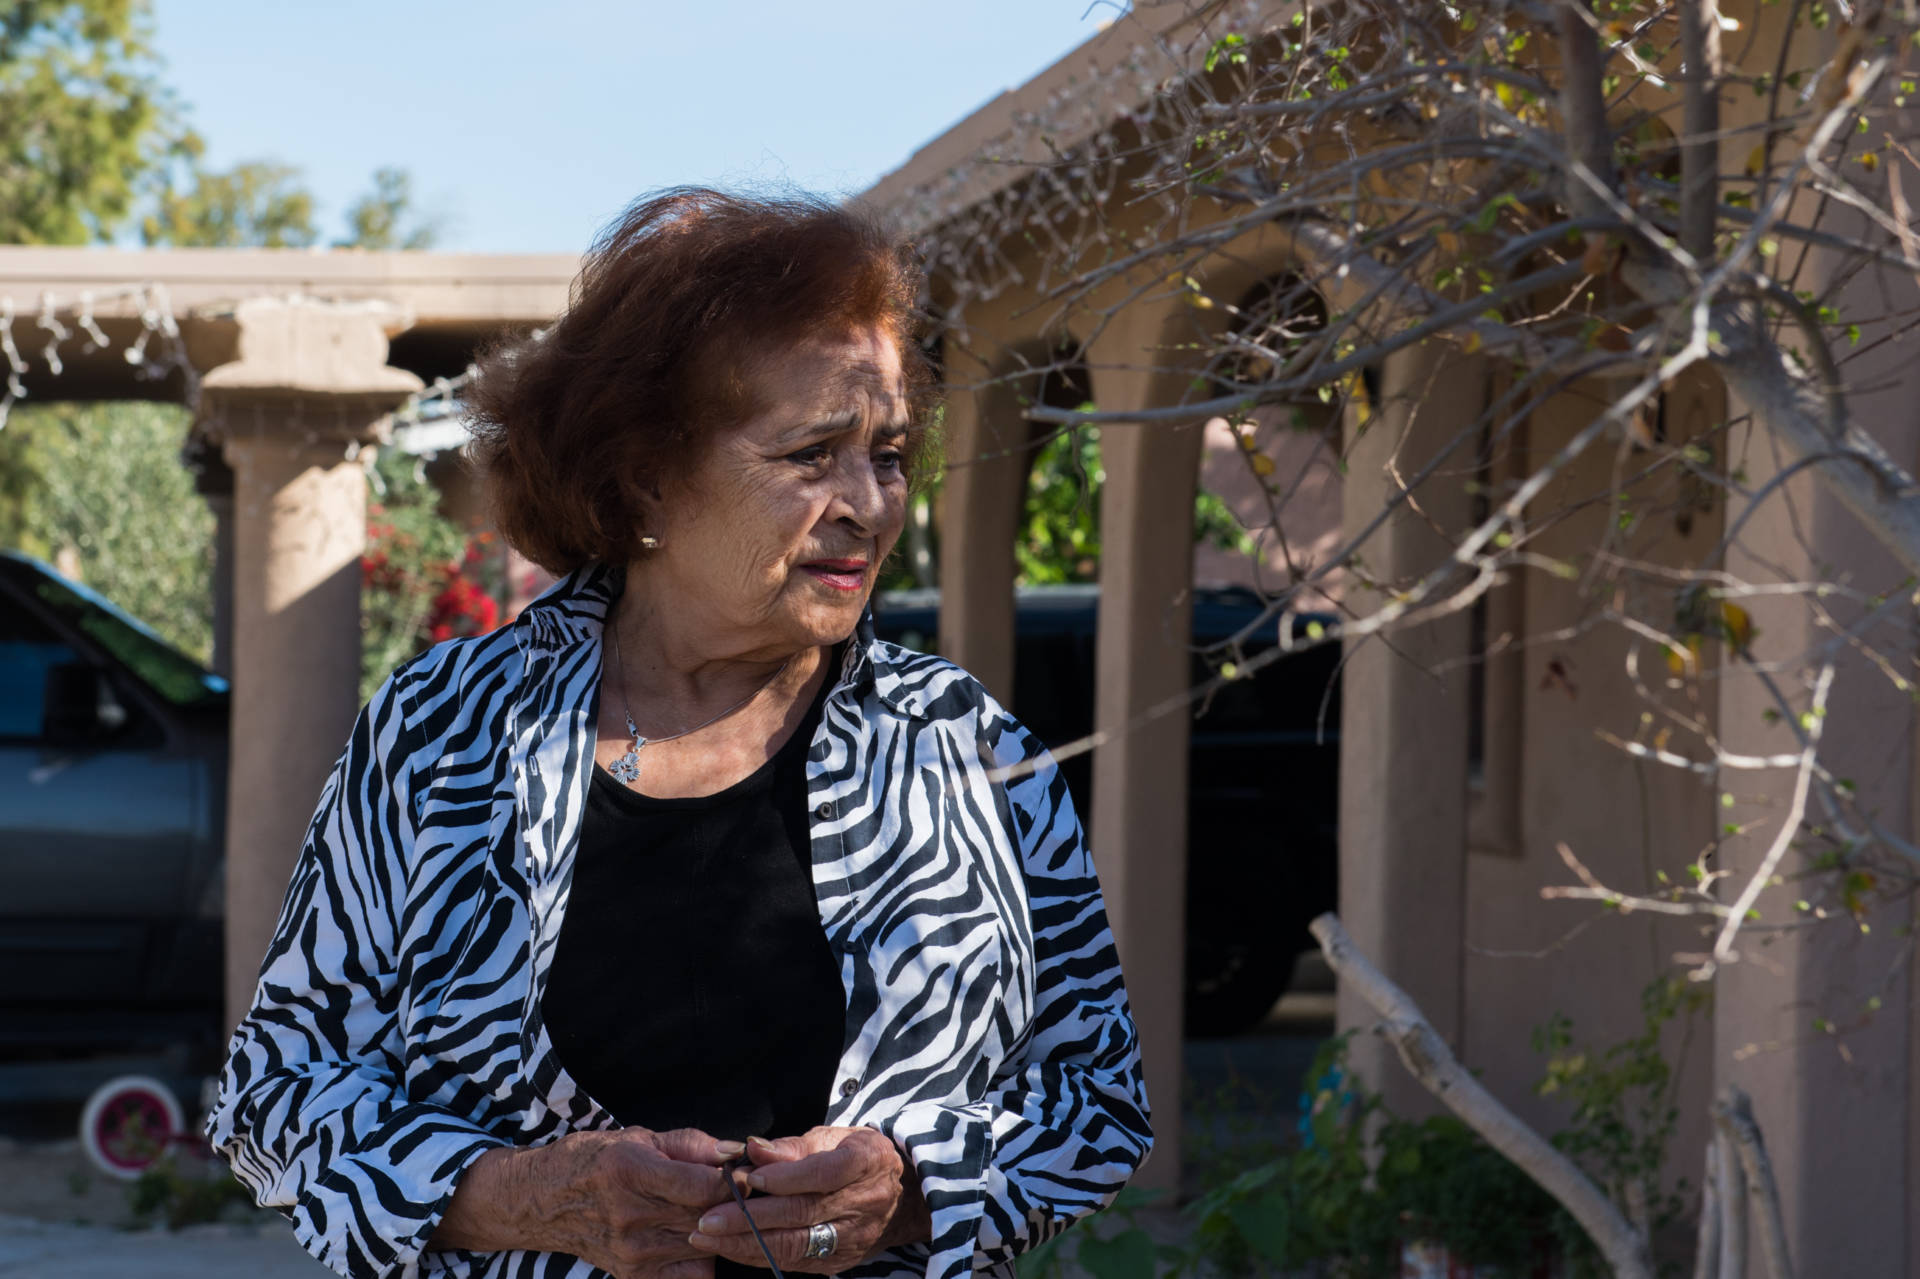 Ramona Morales, 79, had to pay about $6,000 in legal bills on top of a fine because one of her tenants kept chickens in the backyard of a rental house. Some Southern California cities are prosecuting code violators and slapping homeowners with gigantic legal bills they can't afford to pay. Jessica Chou for NPR